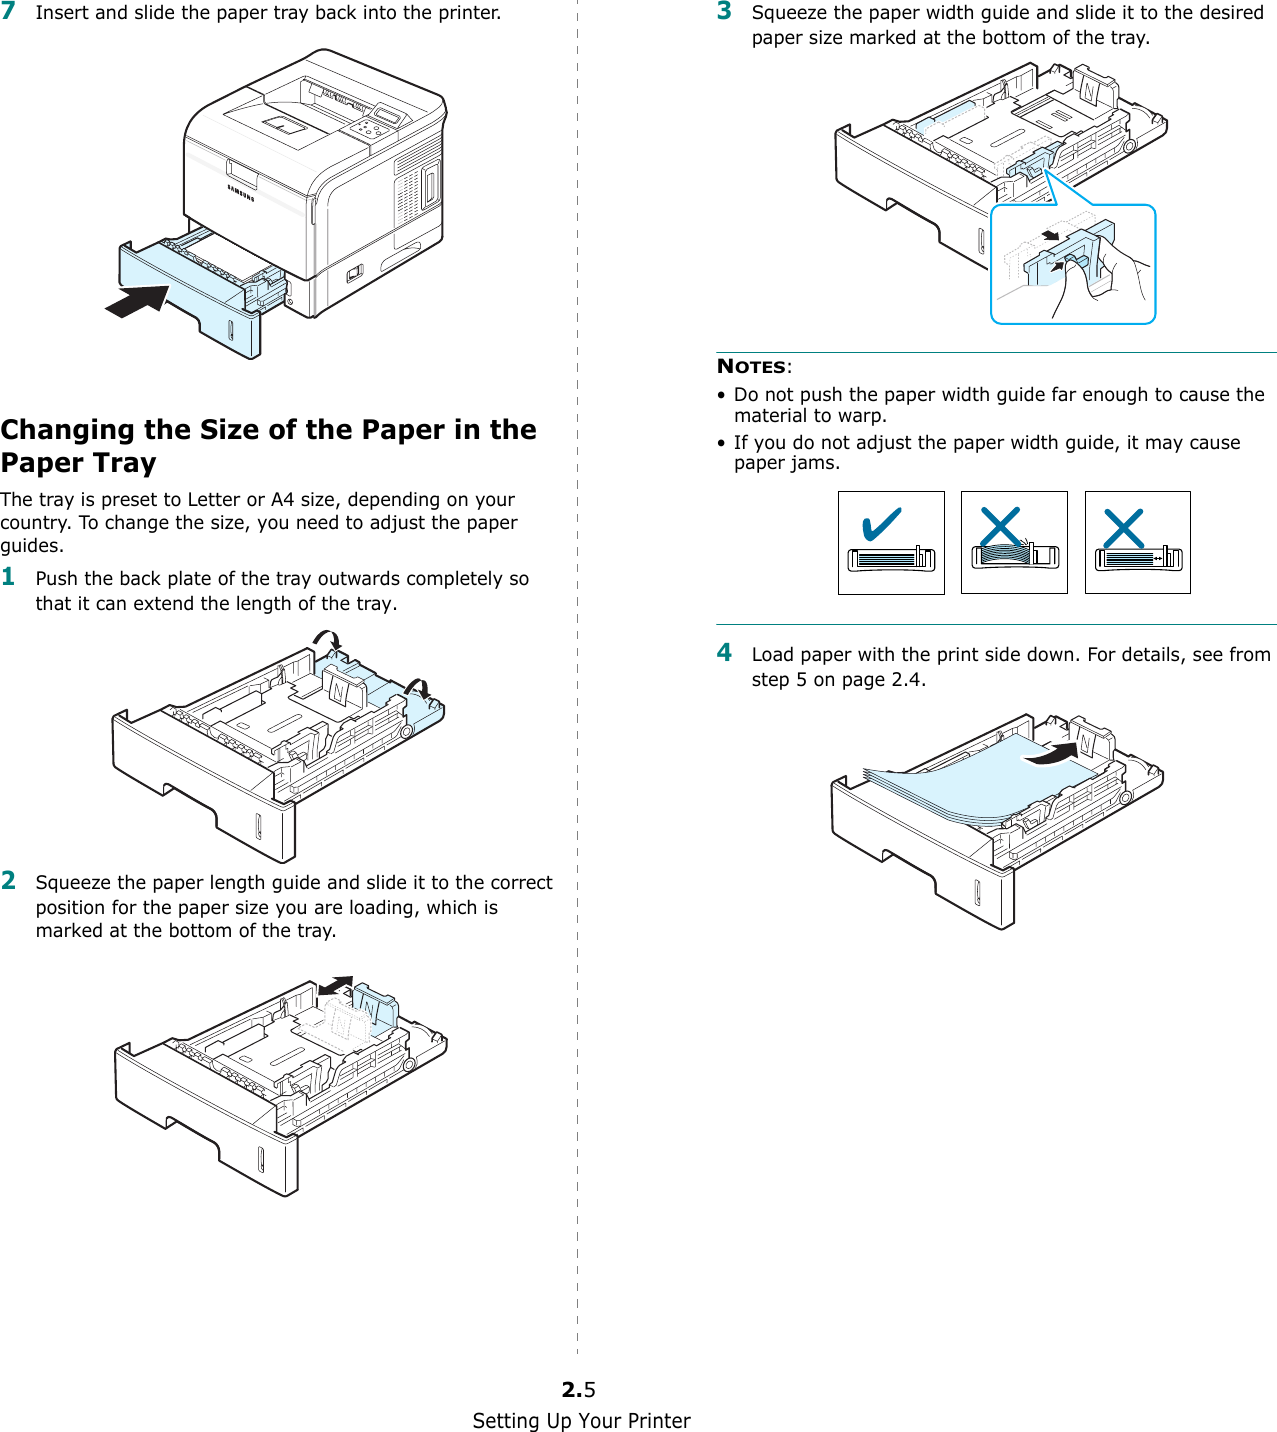 Setting Up Your Printer2.57Insert and slide the paper tray back into the printer.Changing the Size of the Paper in the Paper TrayThe tray is preset to Letter or A4 size, depending on your country. To change the size, you need to adjust the paper guides.1Push the back plate of the tray outwards completely so that it can extend the length of the tray.2Squeeze the paper length guide and slide it to the correct position for the paper size you are loading, which is marked at the bottom of the tray.3Squeeze the paper width guide and slide it to the desired paper size marked at the bottom of the tray.NOTES: • Do not push the paper width guide far enough to cause the material to warp. • If you do not adjust the paper width guide, it may cause paper jams.4Load paper with the print side down. For details, see from step 5 on page 2.4.